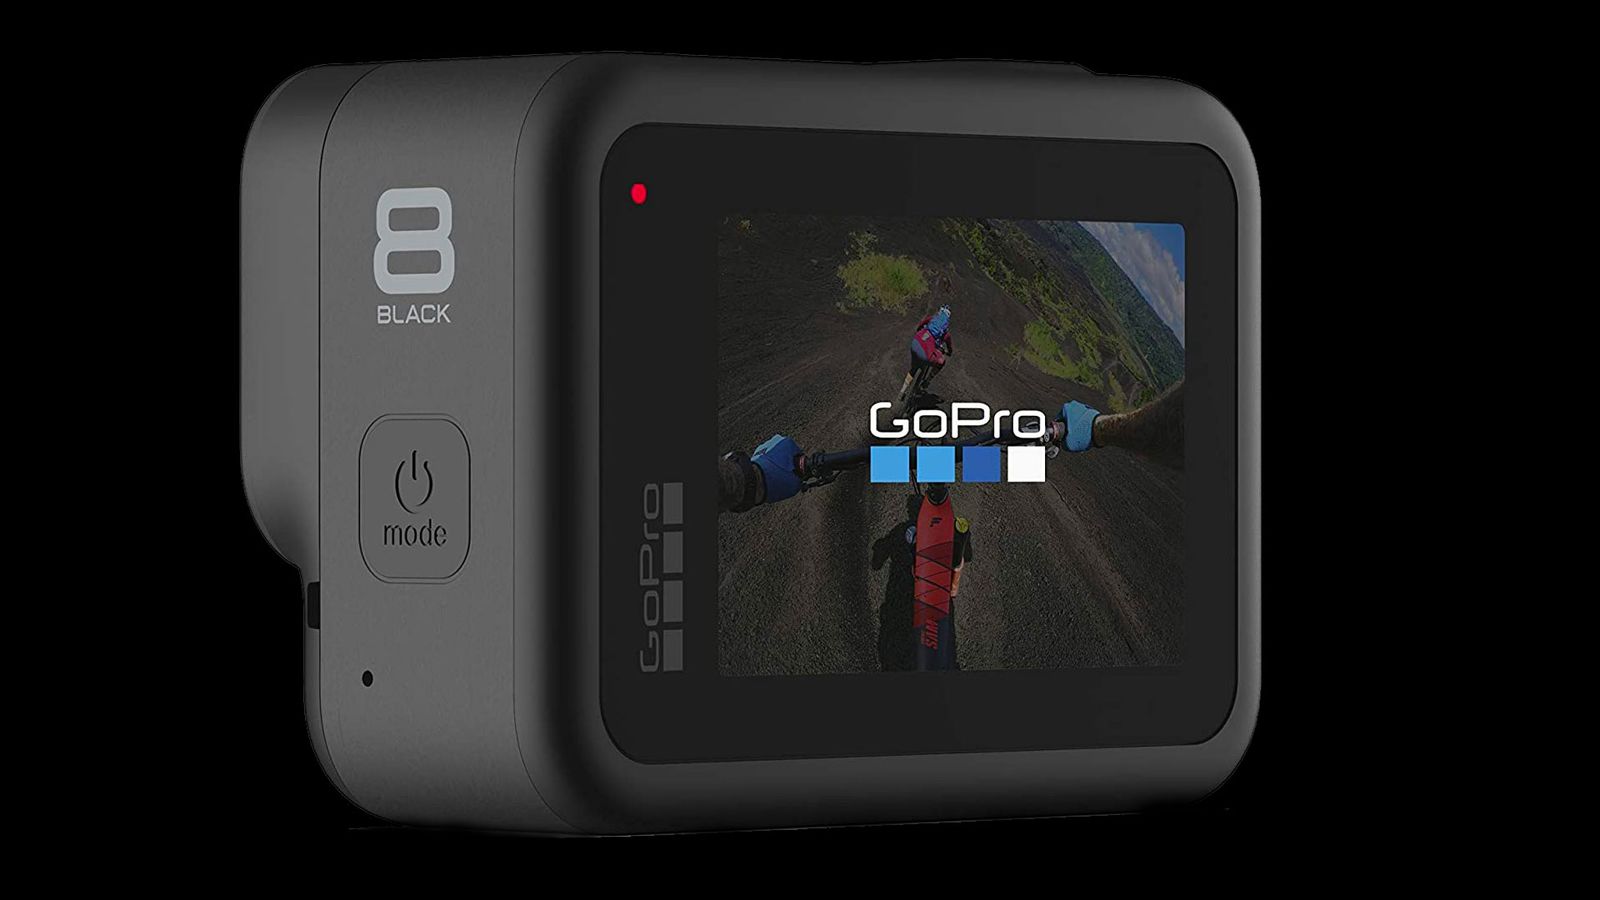 Best GoPro HERO8 product image of a black camera with a POV shot of mountain biking on the display.